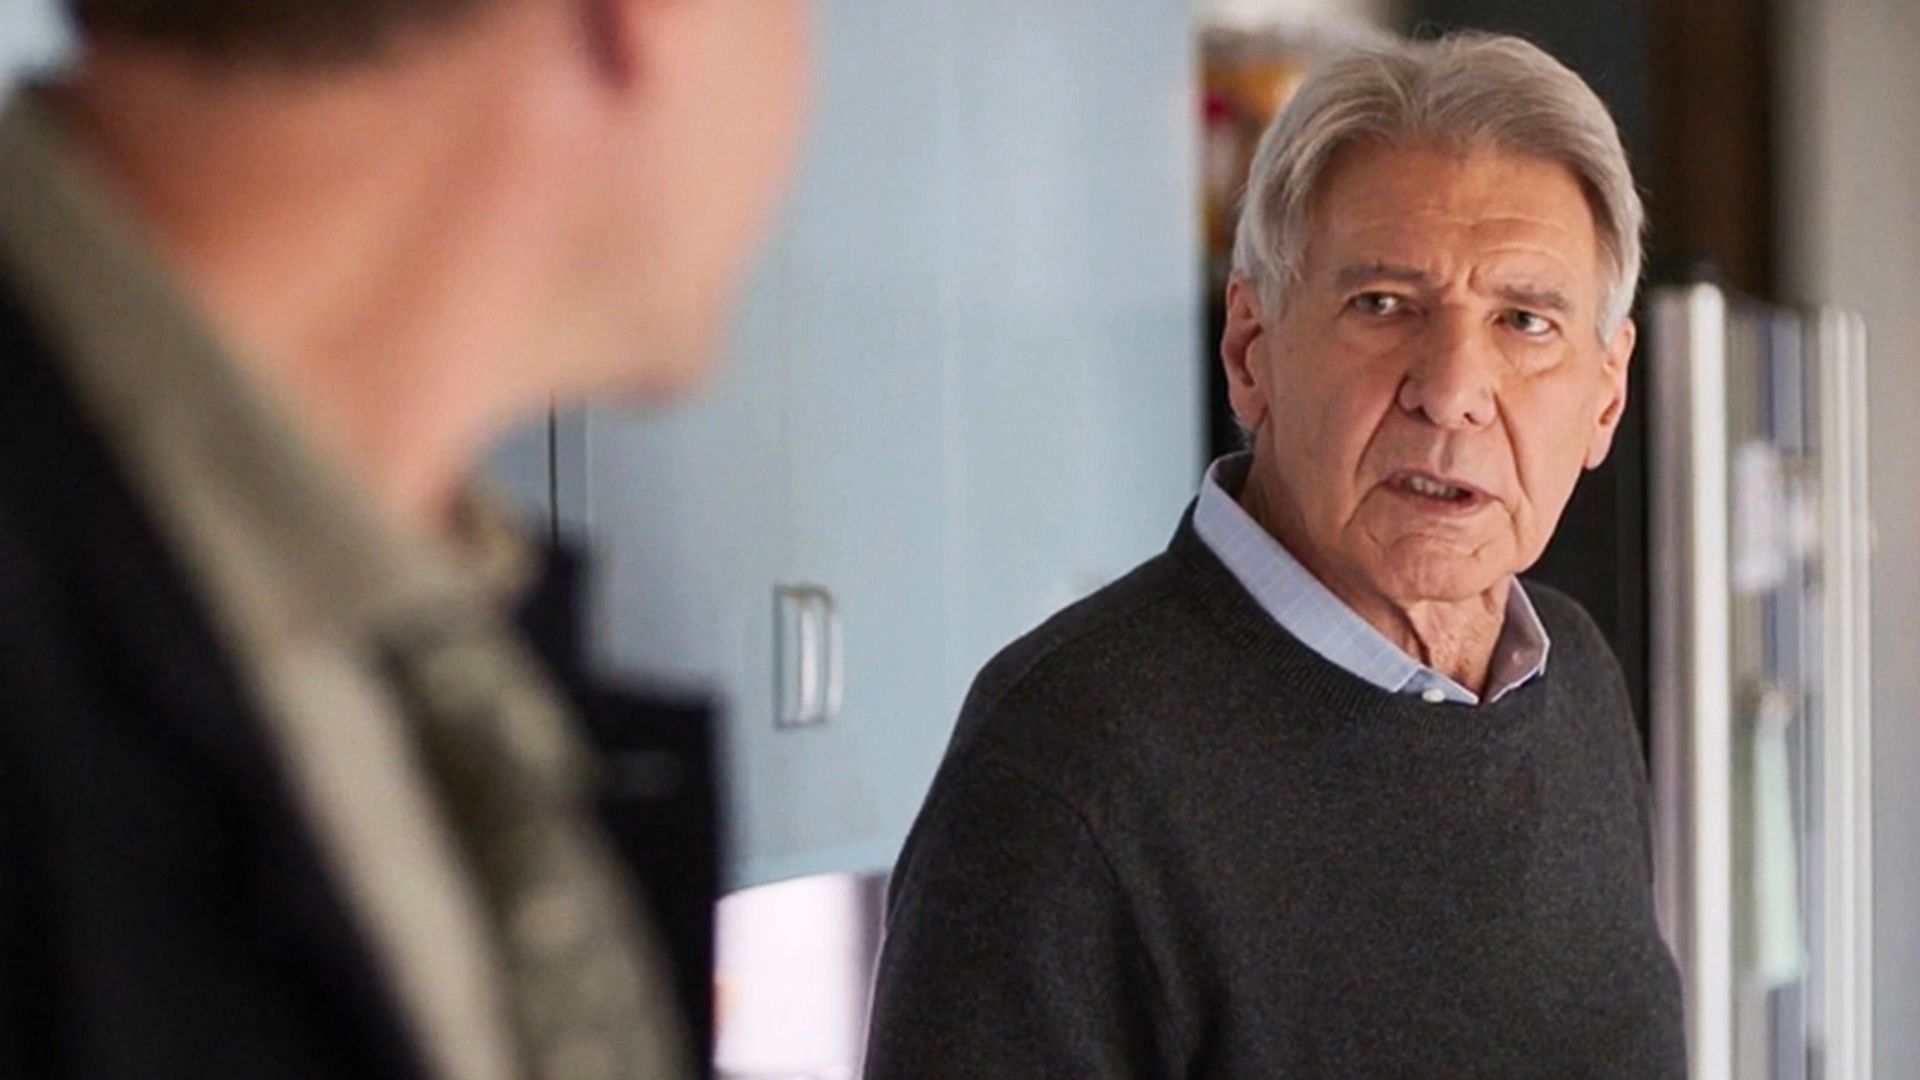 Harrison Ford tried something different by joining Shrinking (Image via Apple TV+)